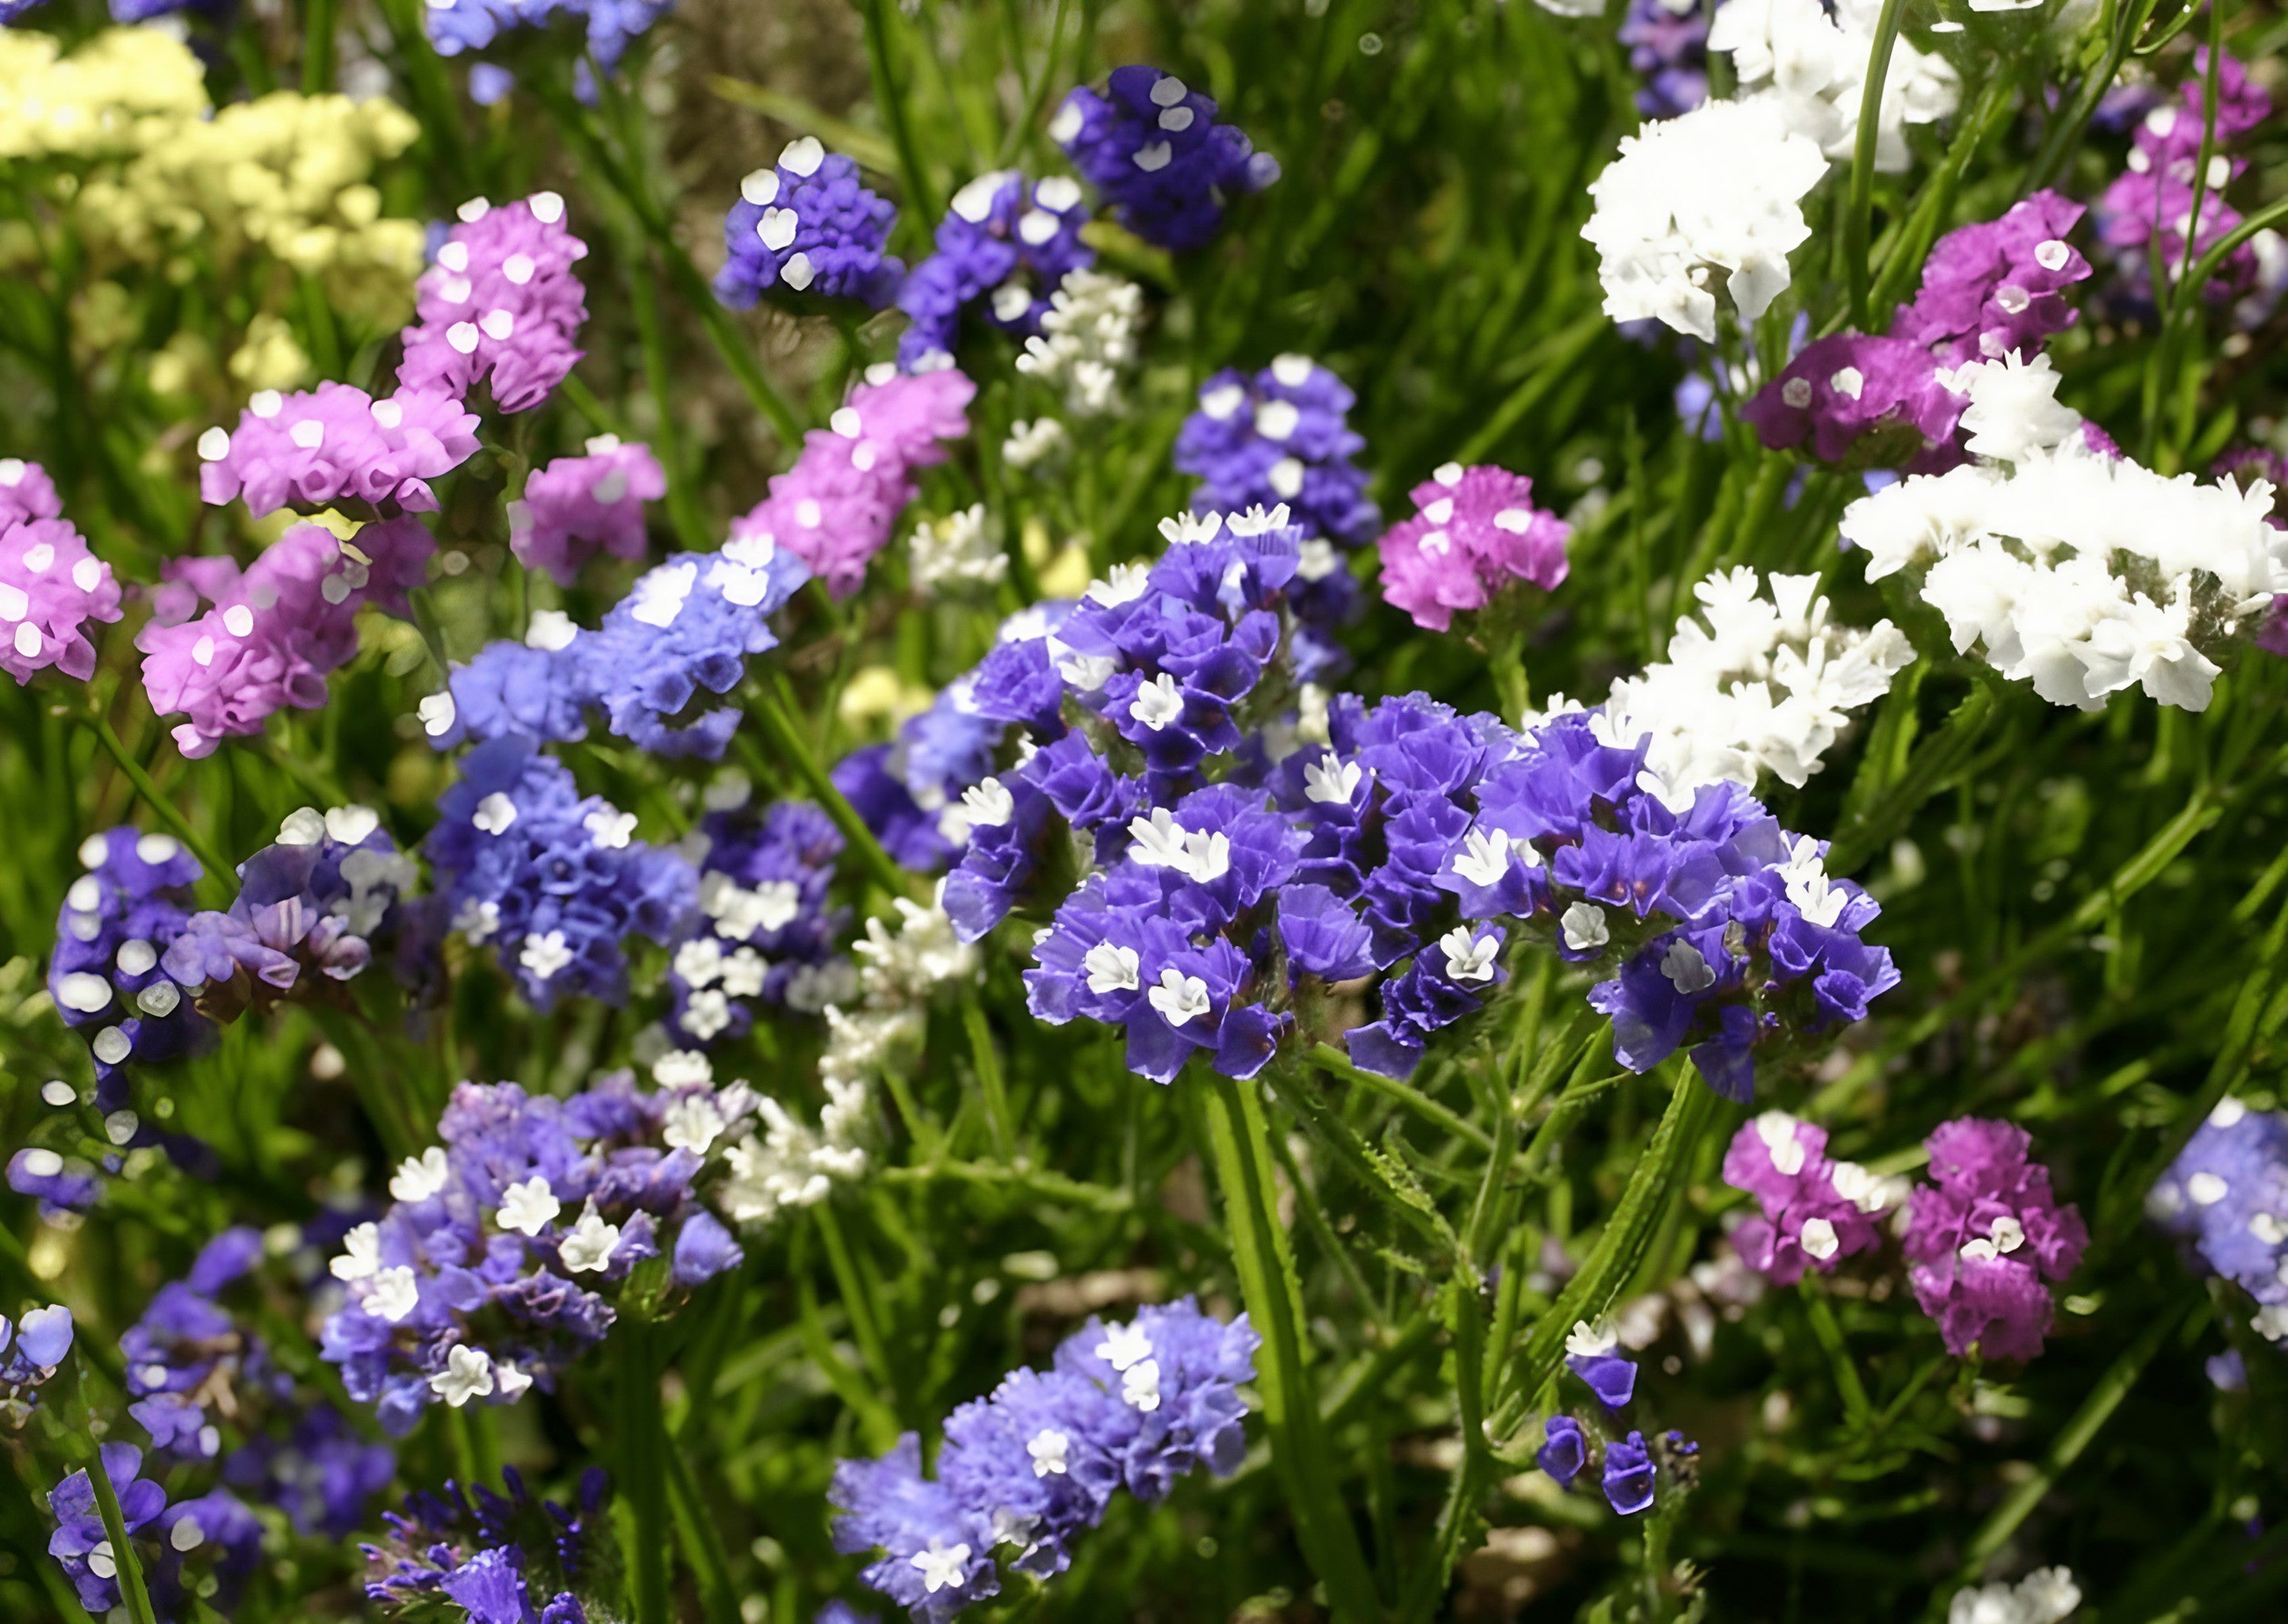 A vibrant field showcasing the colorful blooms of Statice Mixed in hues of purple, white, and blue